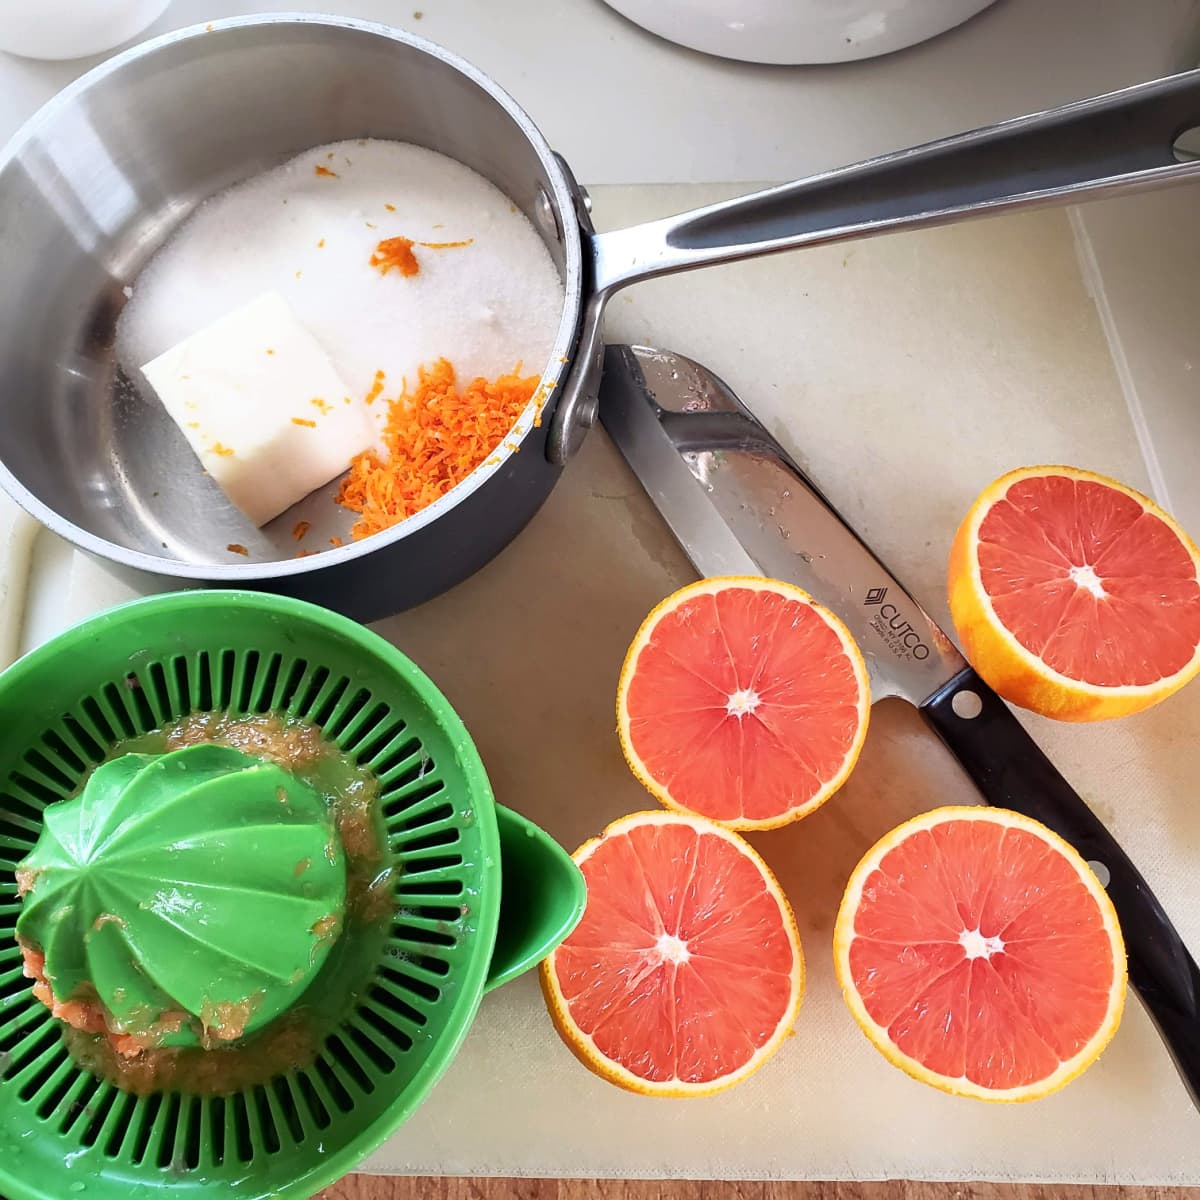 4 orange halves sit on a white cutting board next to a green juicer, knives and a small saucepan